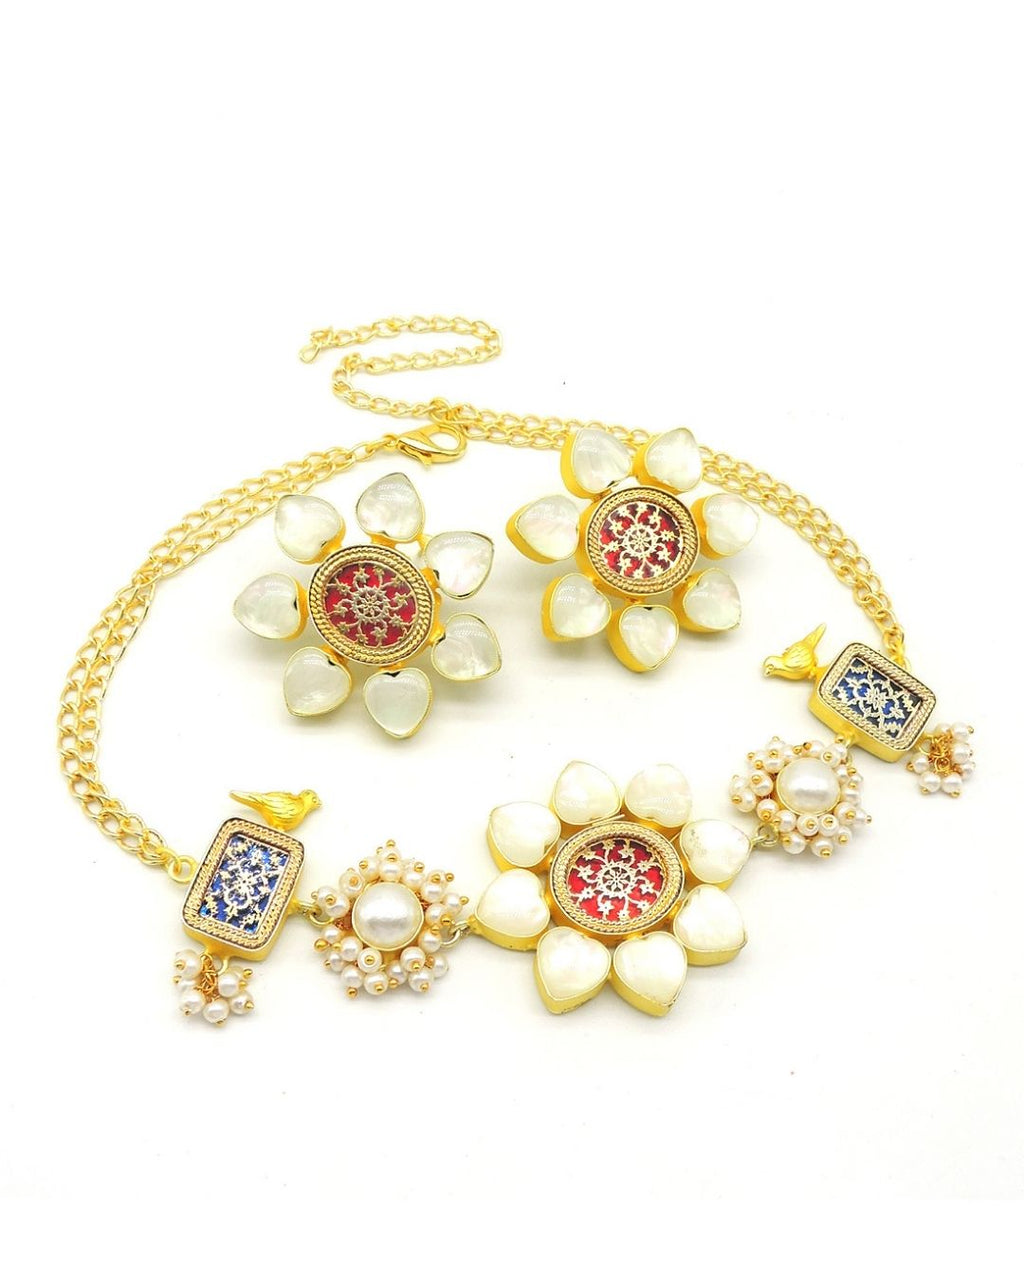 Arya Necklace - Necklaces - Handcrafted Jewellery - Made in India - Dubai Jewellery, Fashion & Lifestyle - Dori